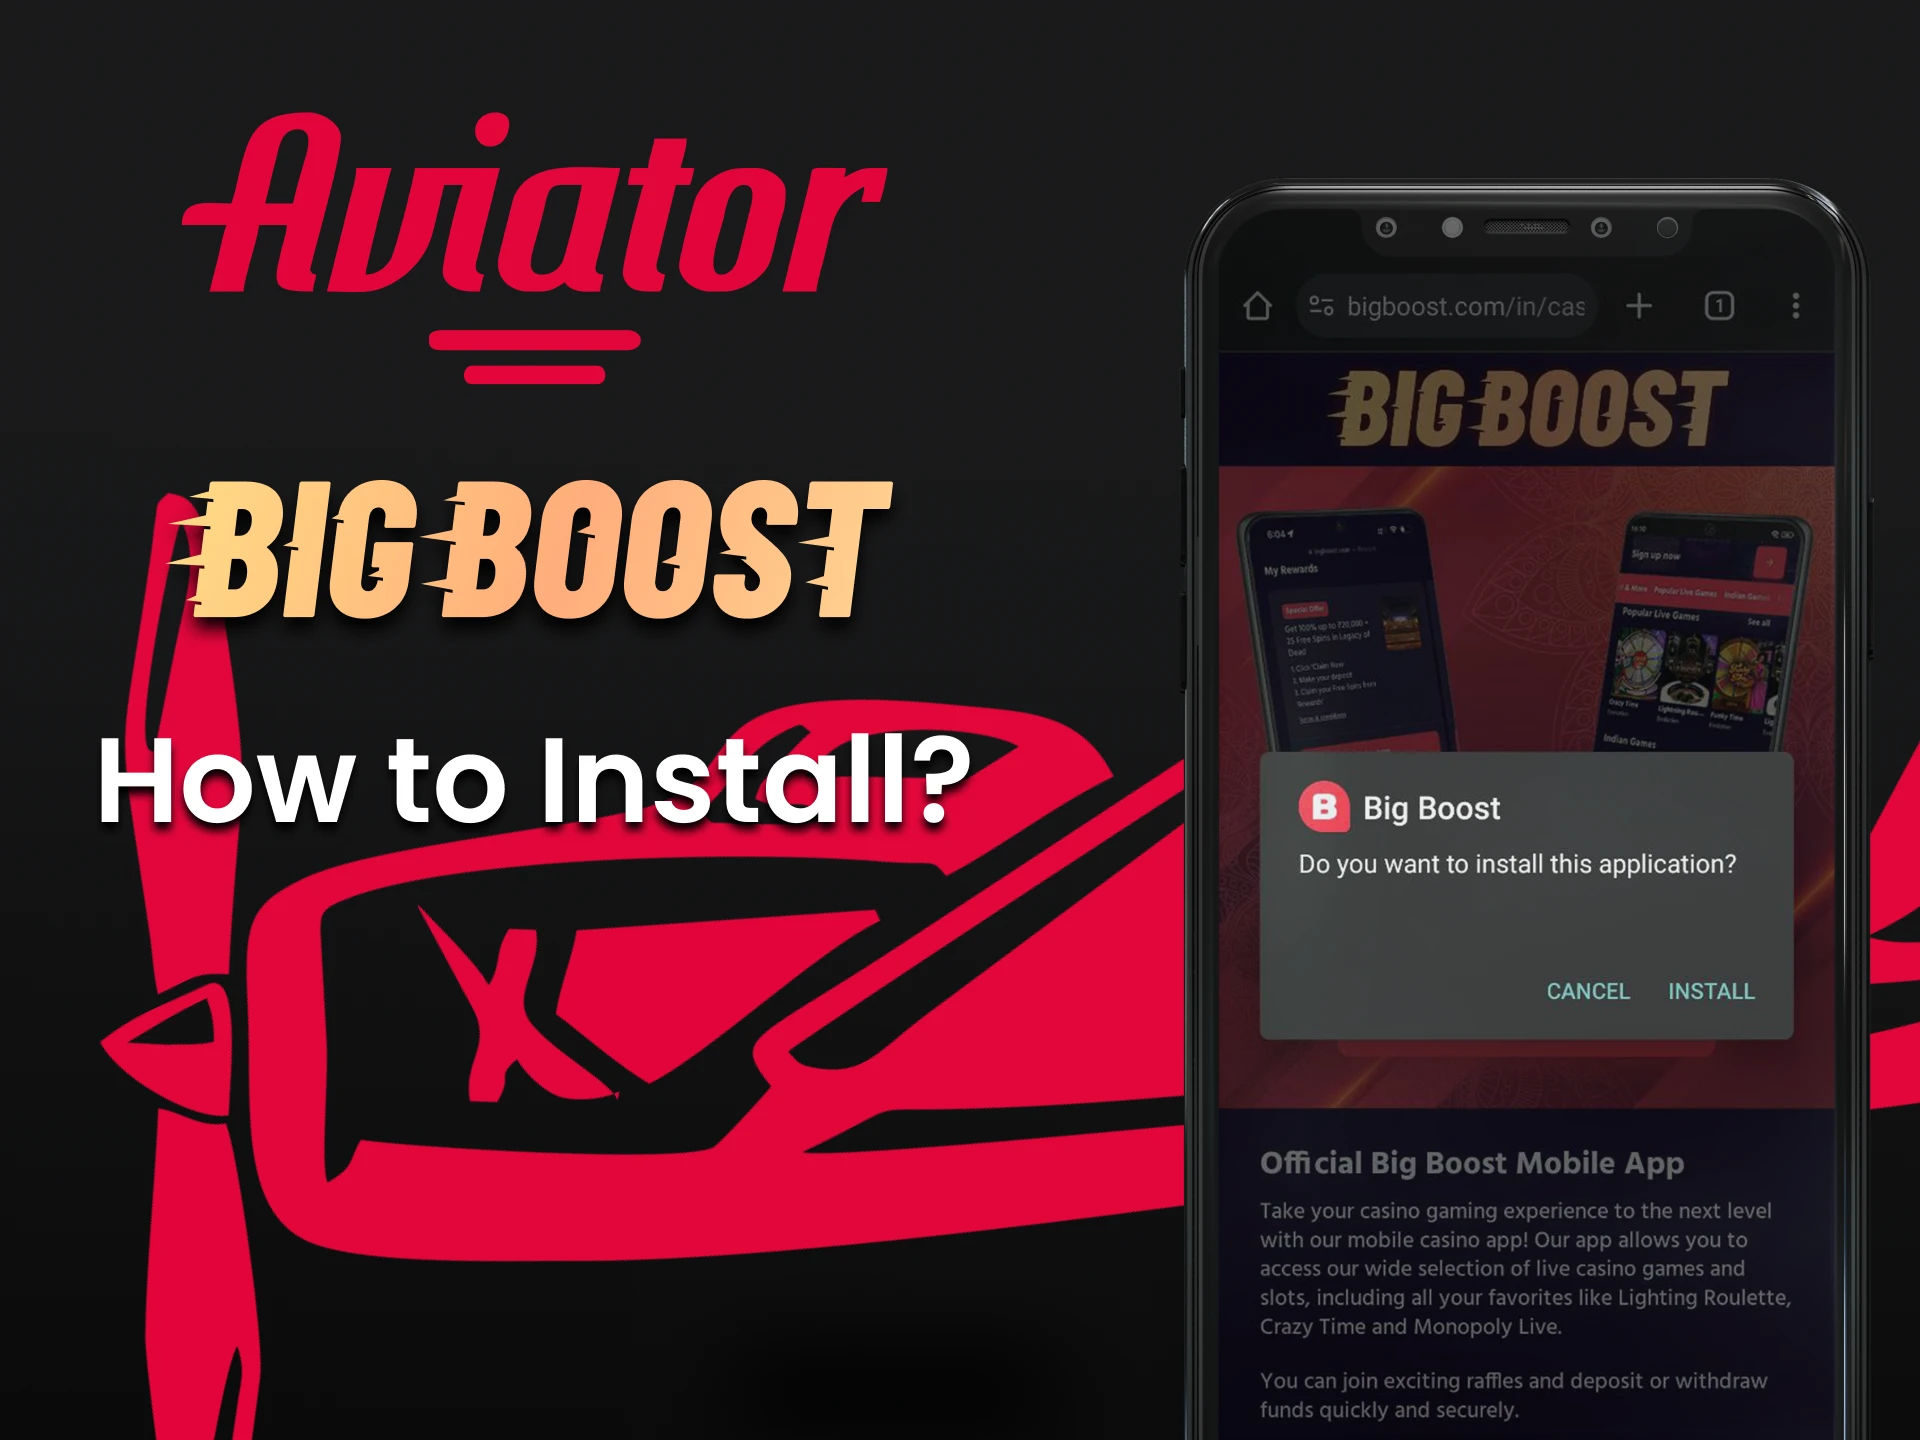 We will tell you how to install the Big Boost application to play Aviator.